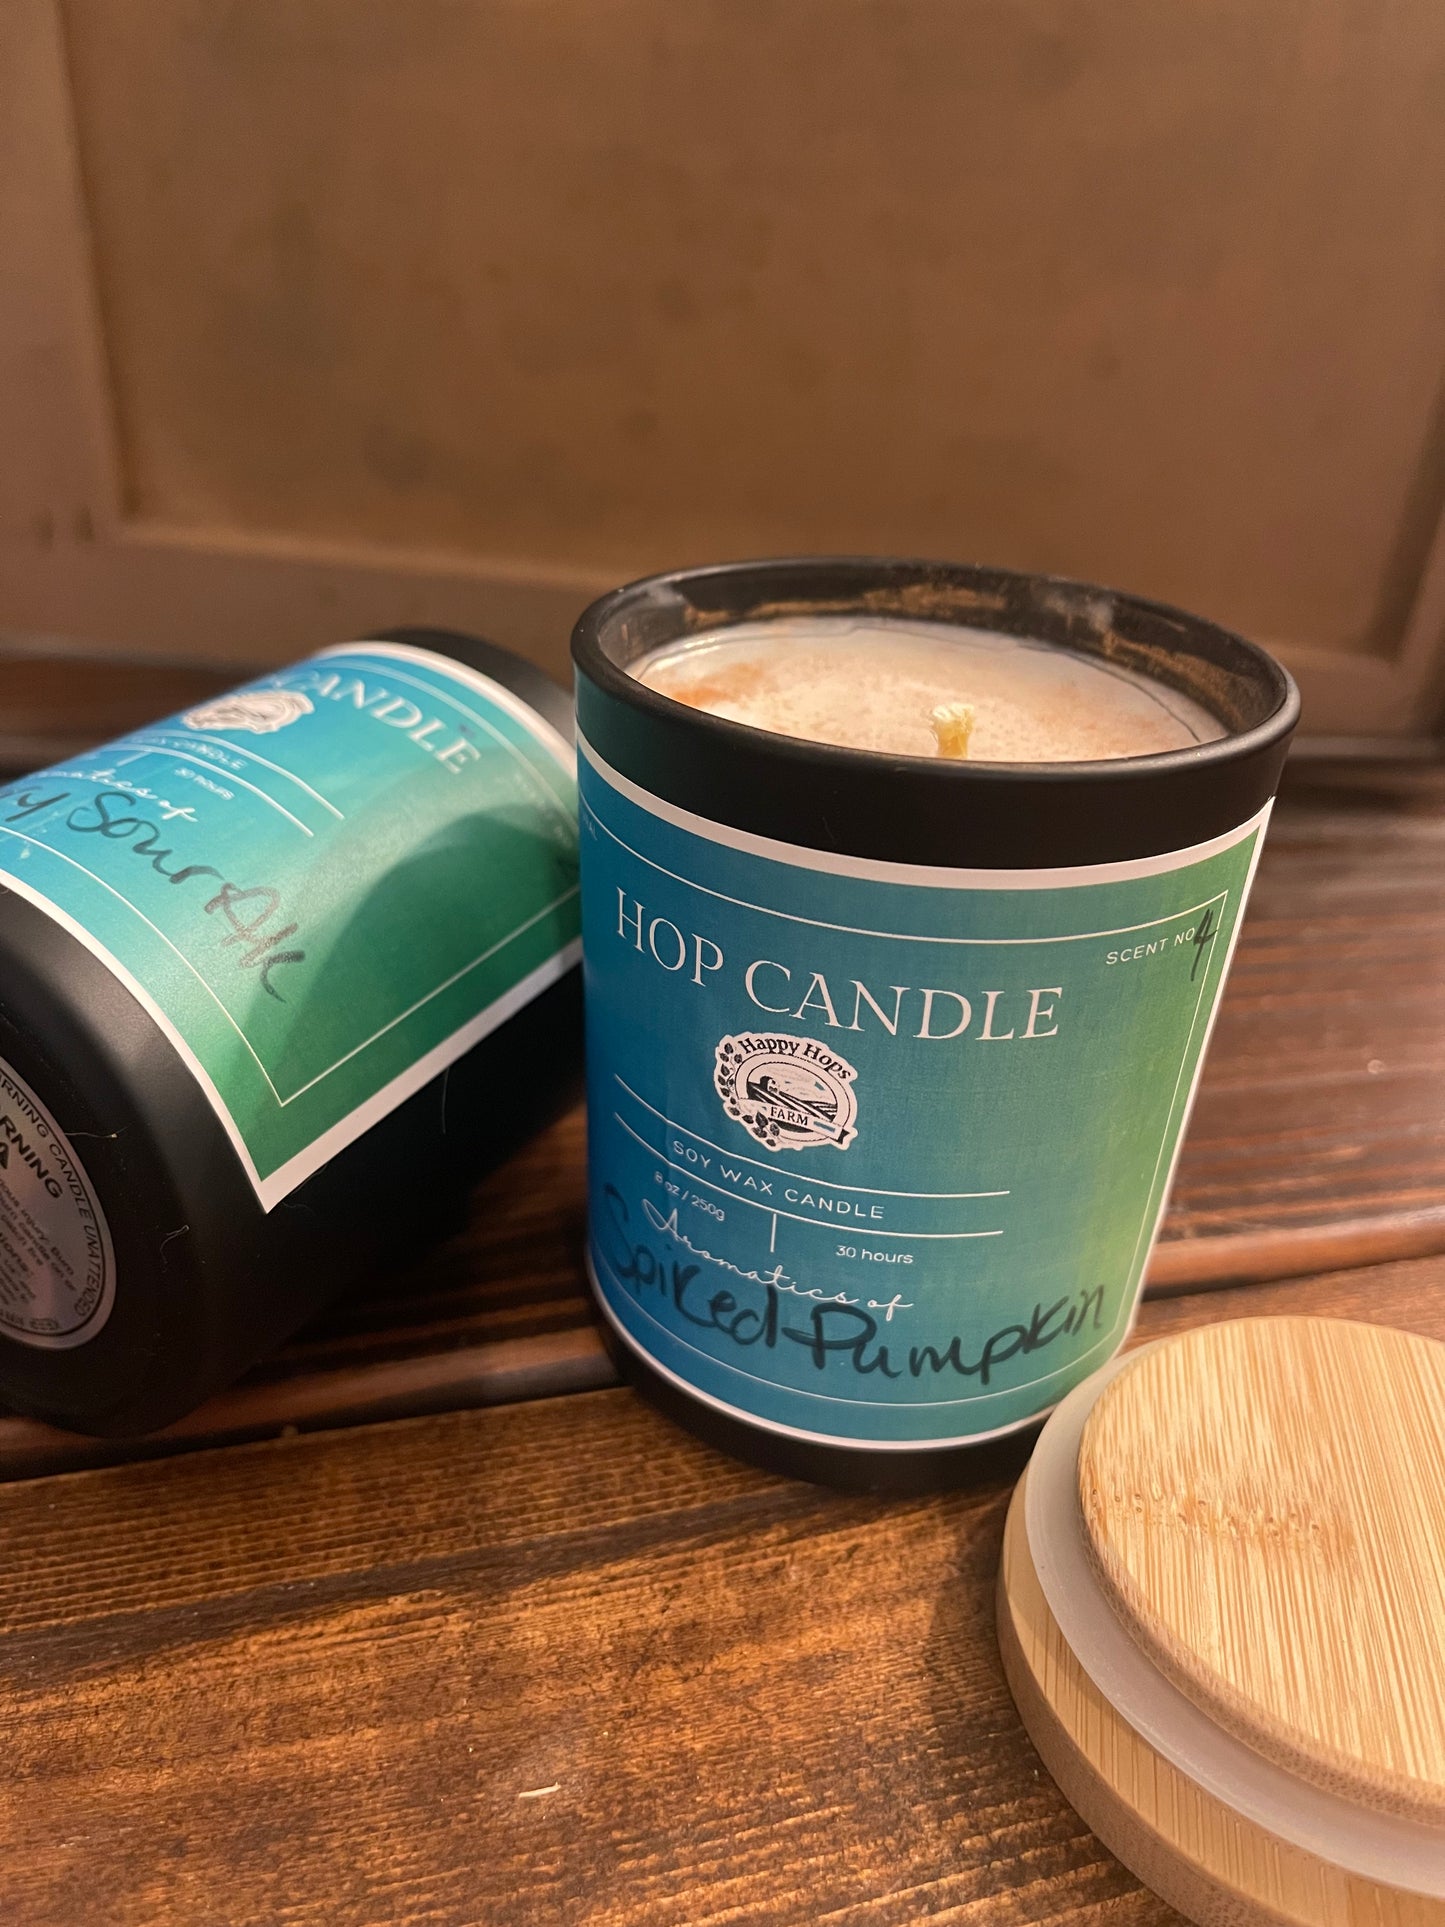 Beer and Hop Candle